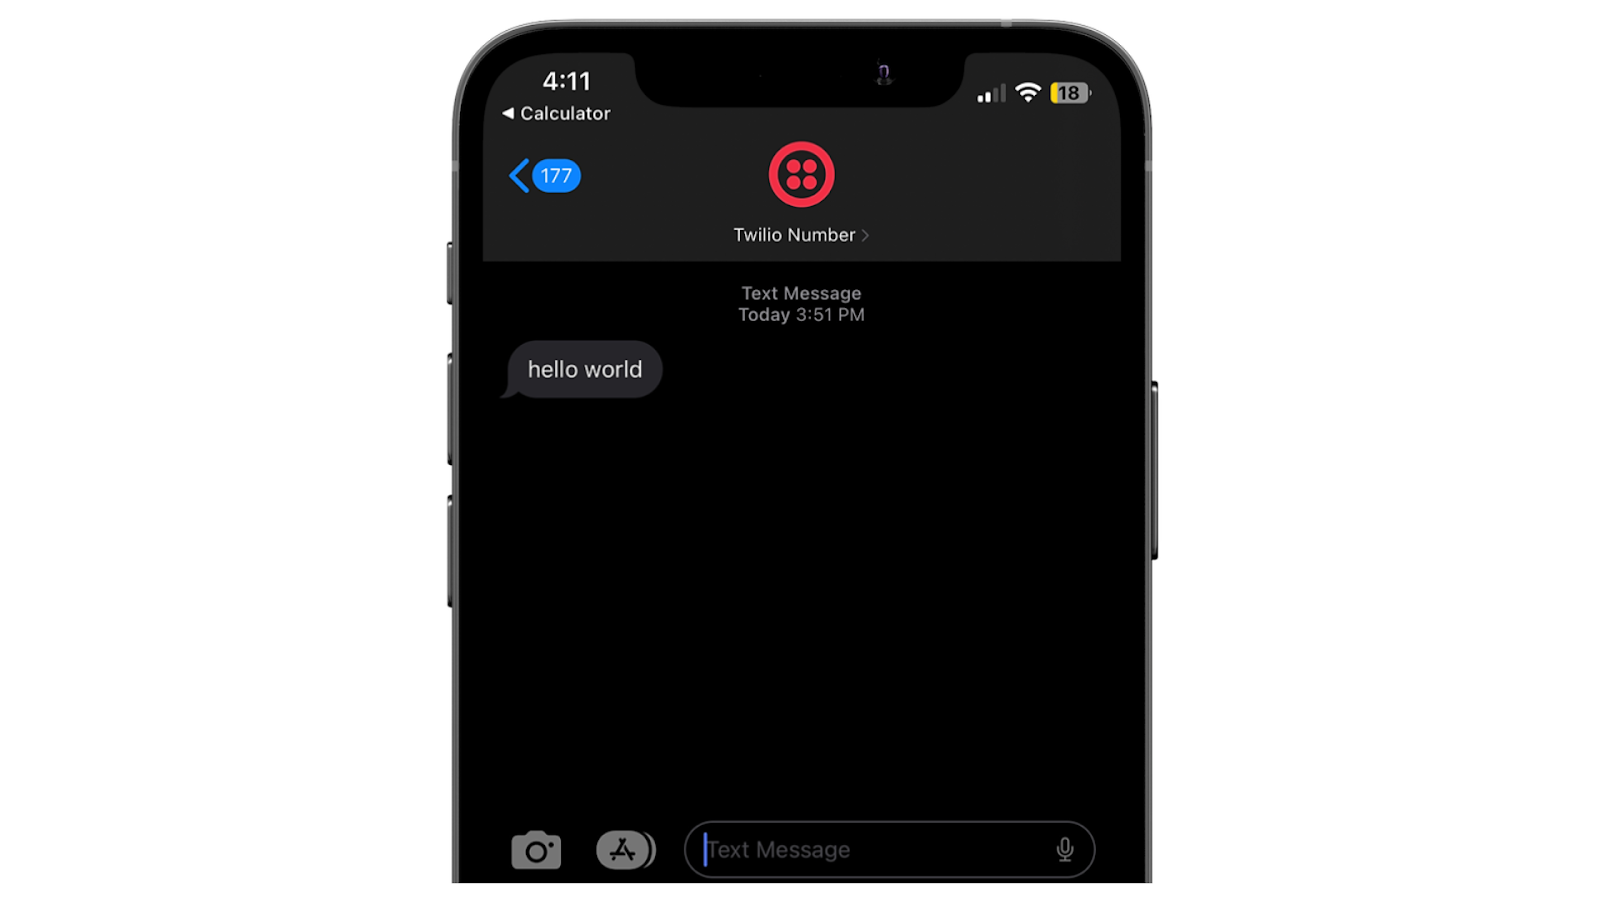 "hello world" SMS from Twilio number shown on iphone